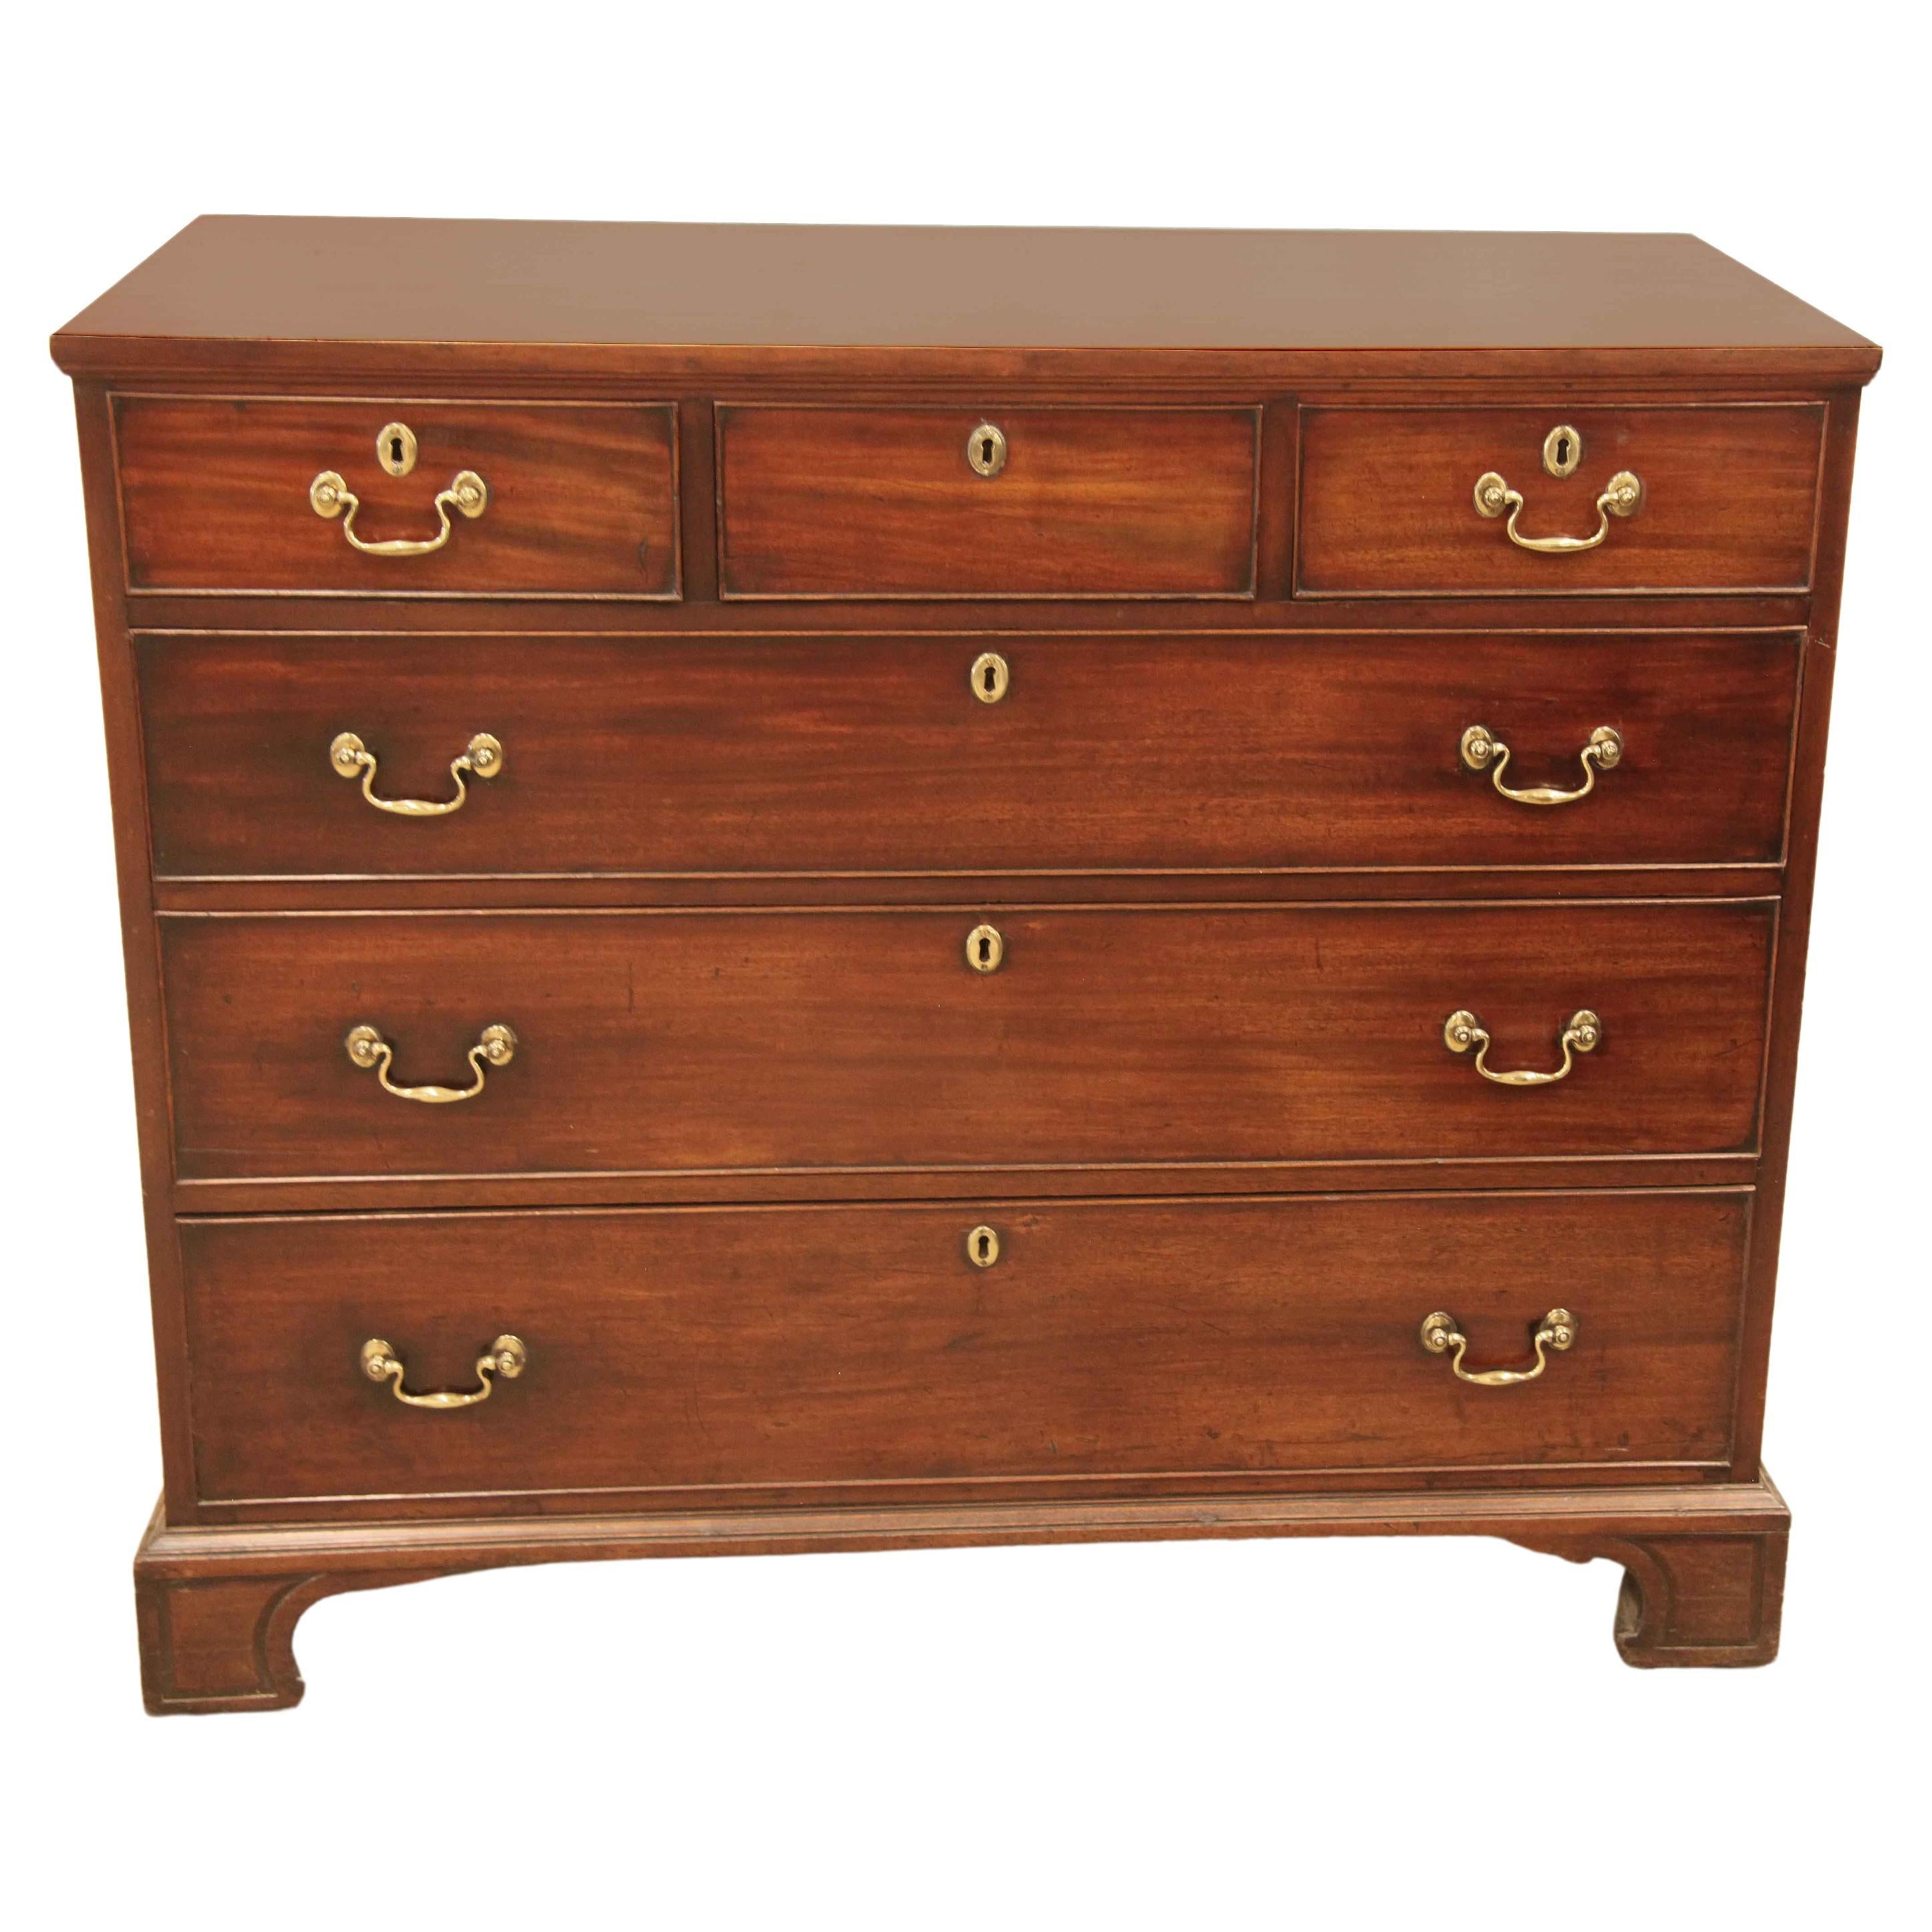 1780s Commodes and Chests of Drawers